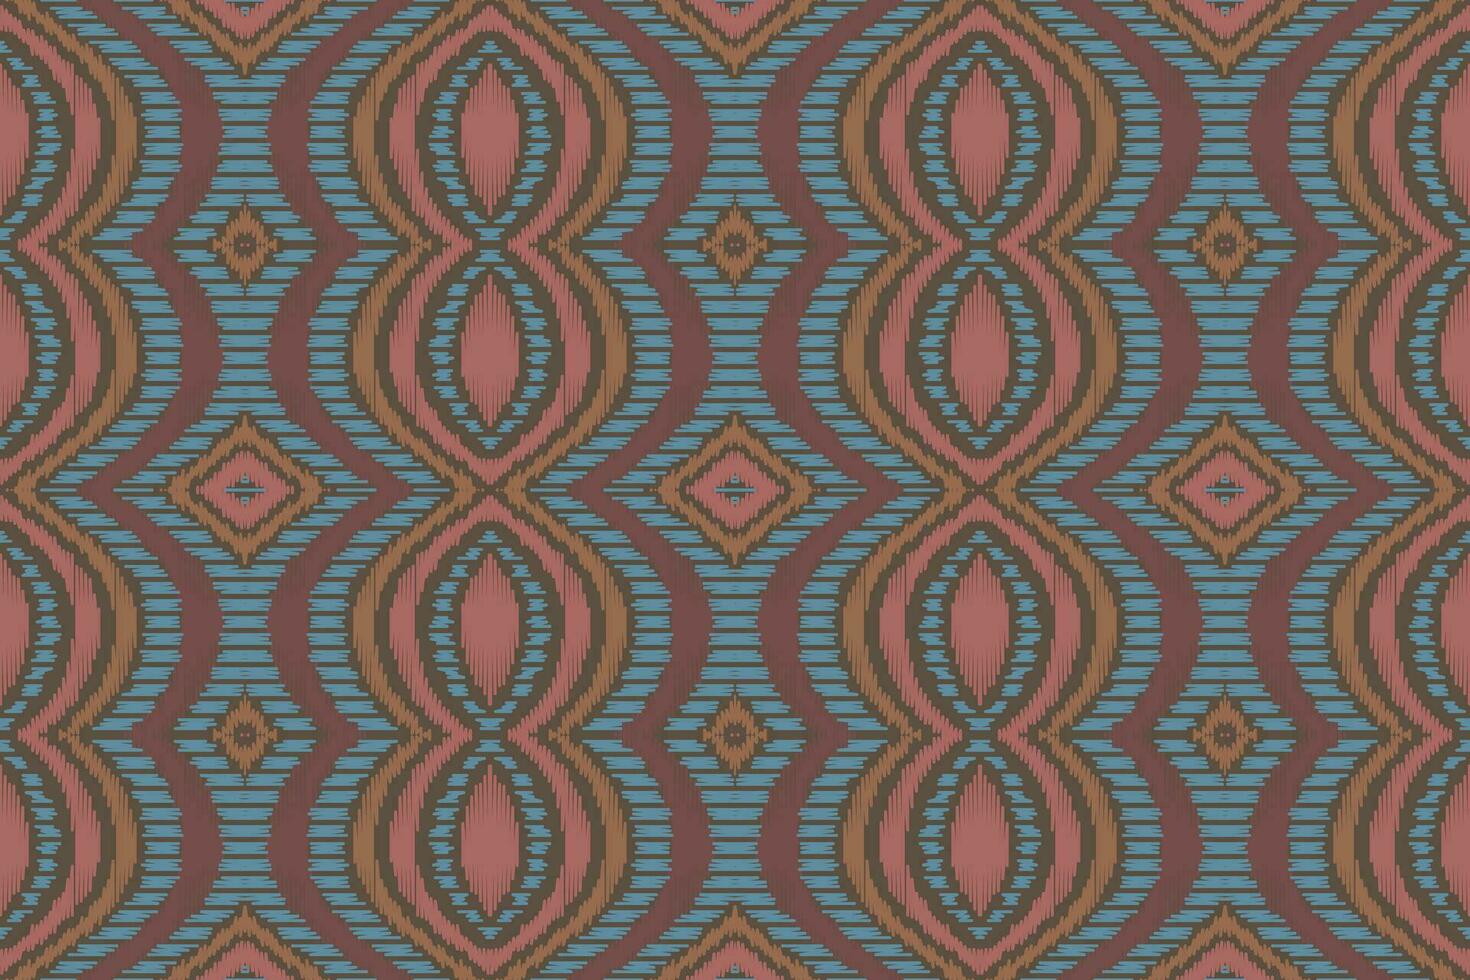 Ikat Damask Paisley Embroidery Background. Ikat Seamless Geometric Ethnic Oriental Pattern traditional.aztec Style Abstract Vector illustration.design Texture,fabric,clothing,wrapping,sarong.